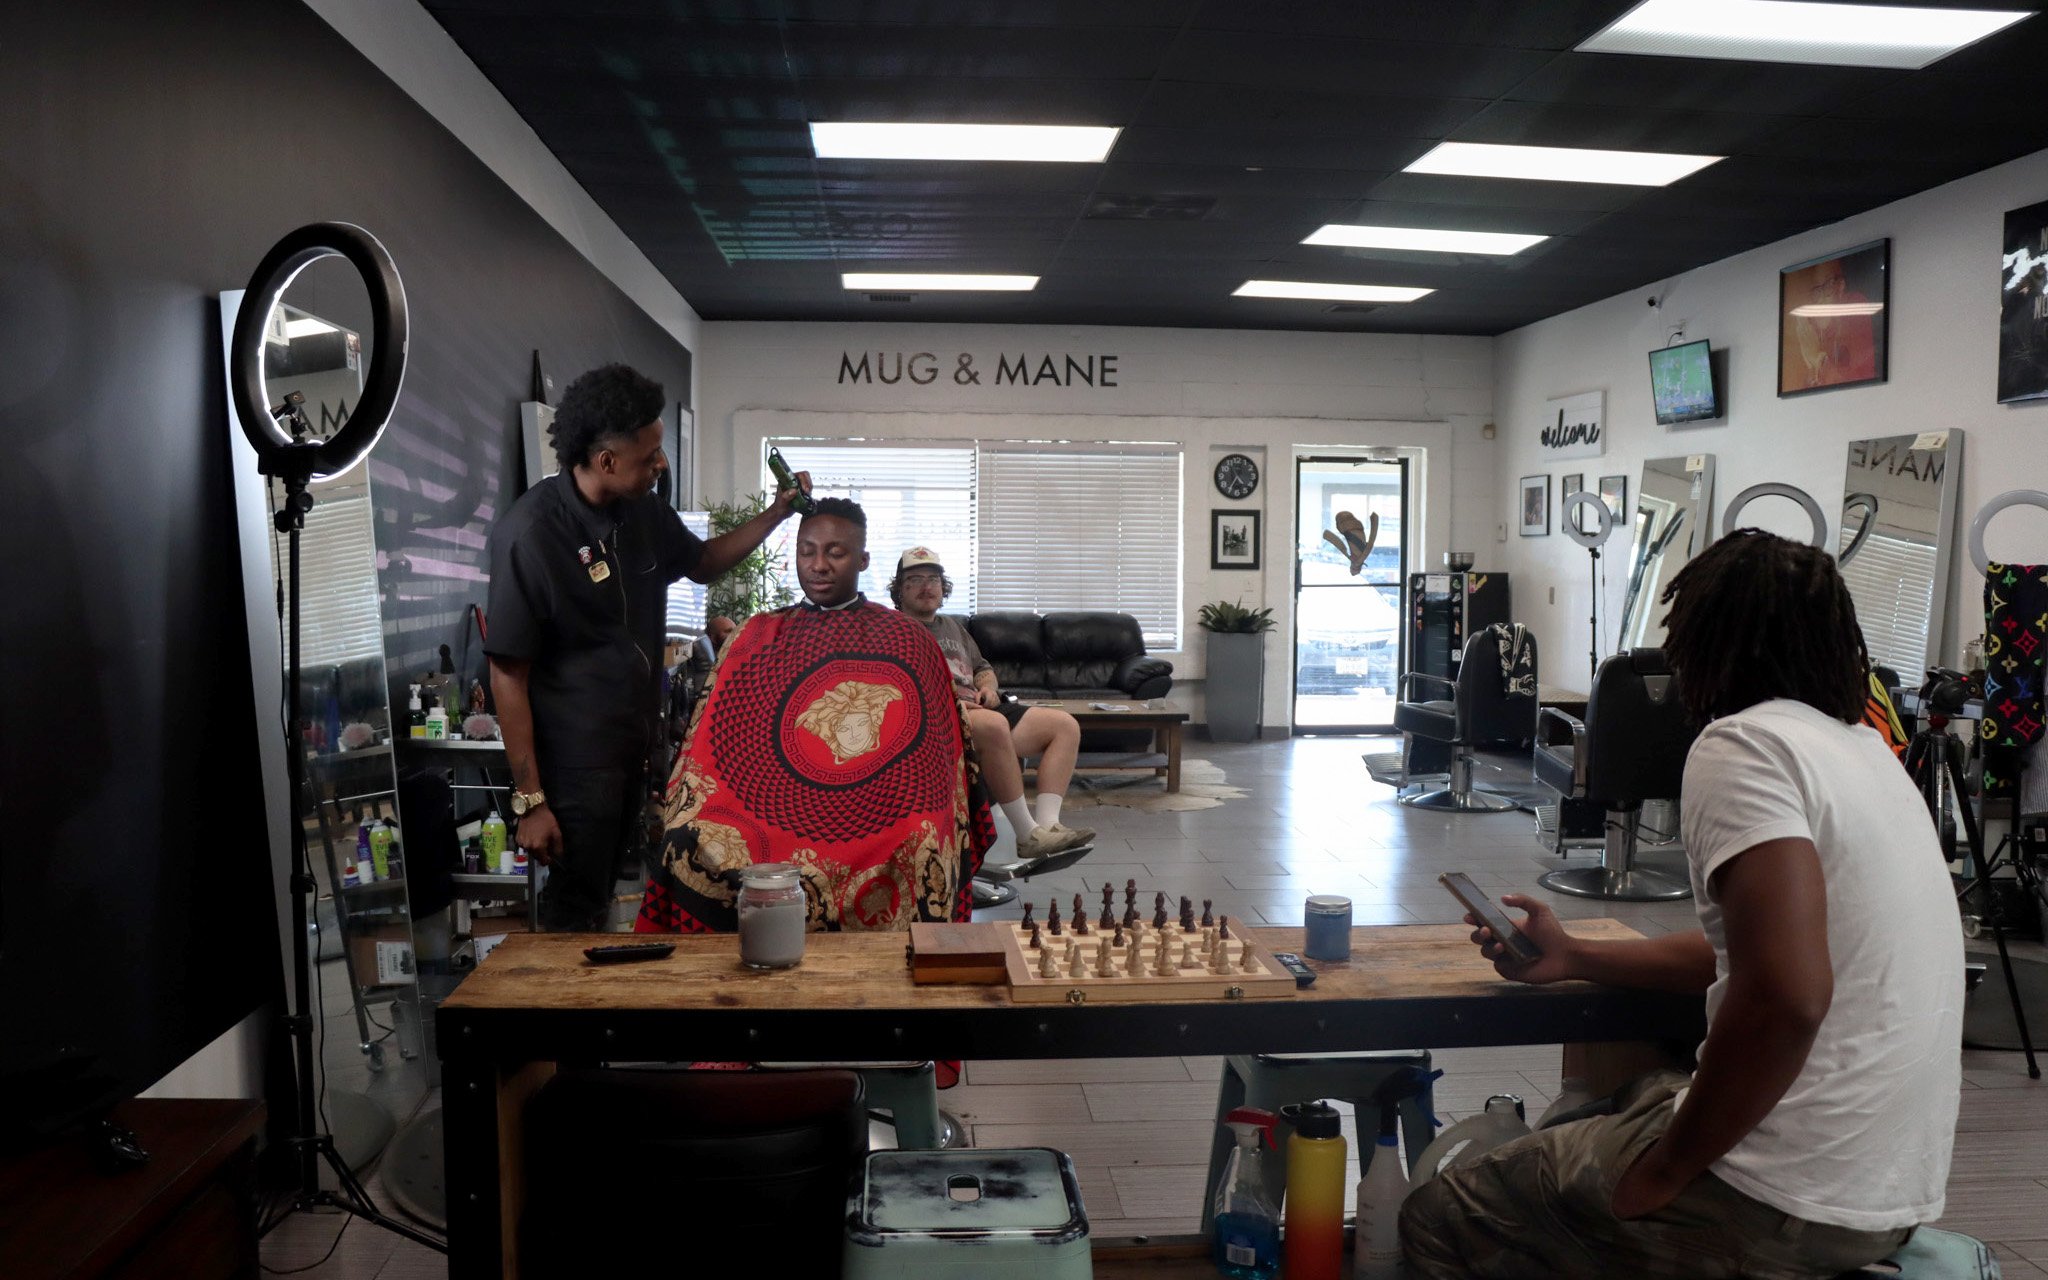 Mug and Mane Barber Lounge is one of Scottsdale's few Black-owned businesses. Owner Dre Brown has cut the hair of NBA star Jamal Murray and NFL star DK Metcalf, among other professional athletes and celebrities. (Photo by Bobby Murphy/Cronkite News)